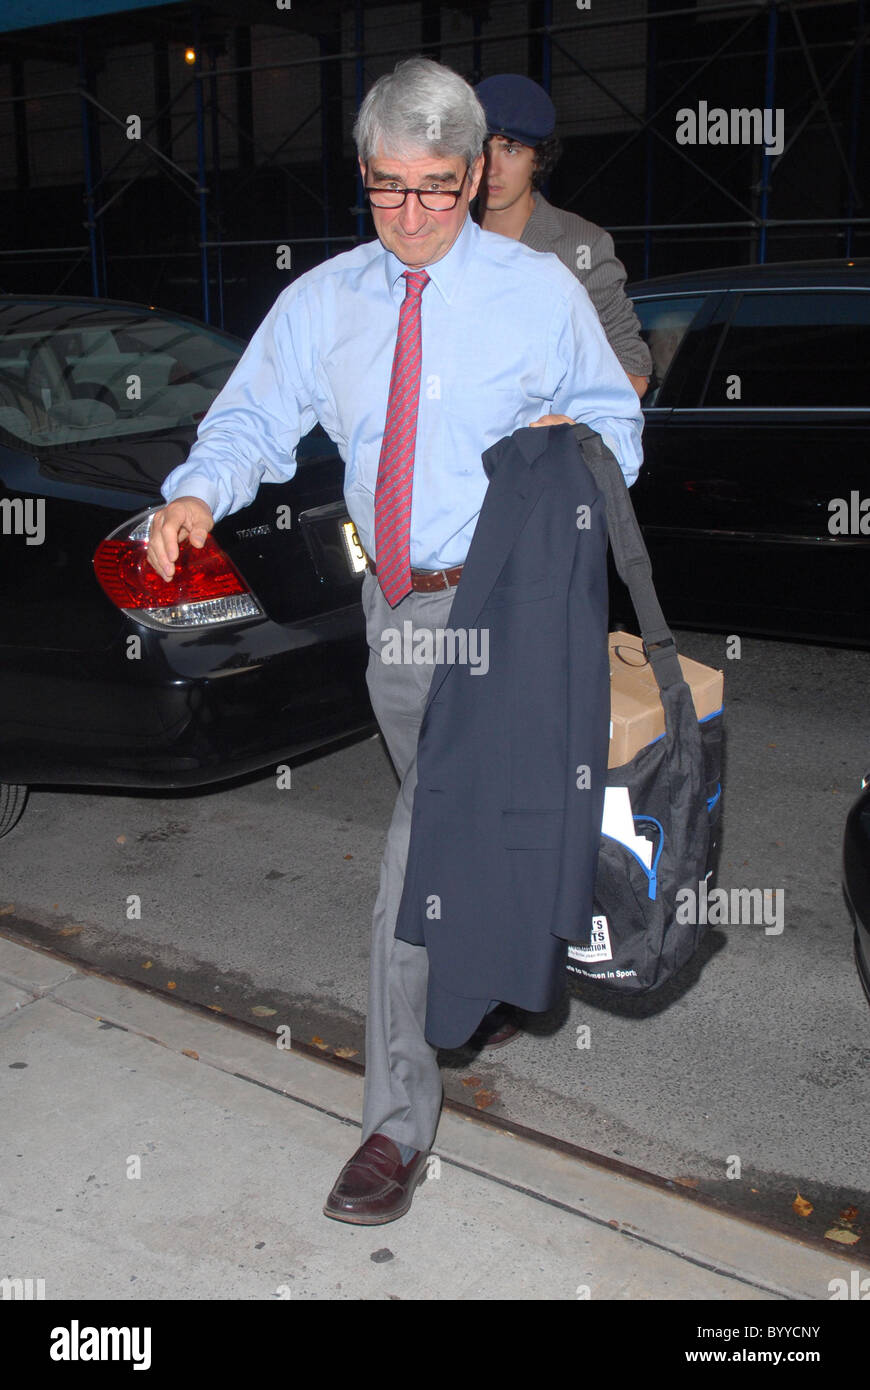 Sam Waterson arrives at Comedy Central Studios to appear on 'The Colbert Report' New York City, USA - 26.09.07 Stock Photo